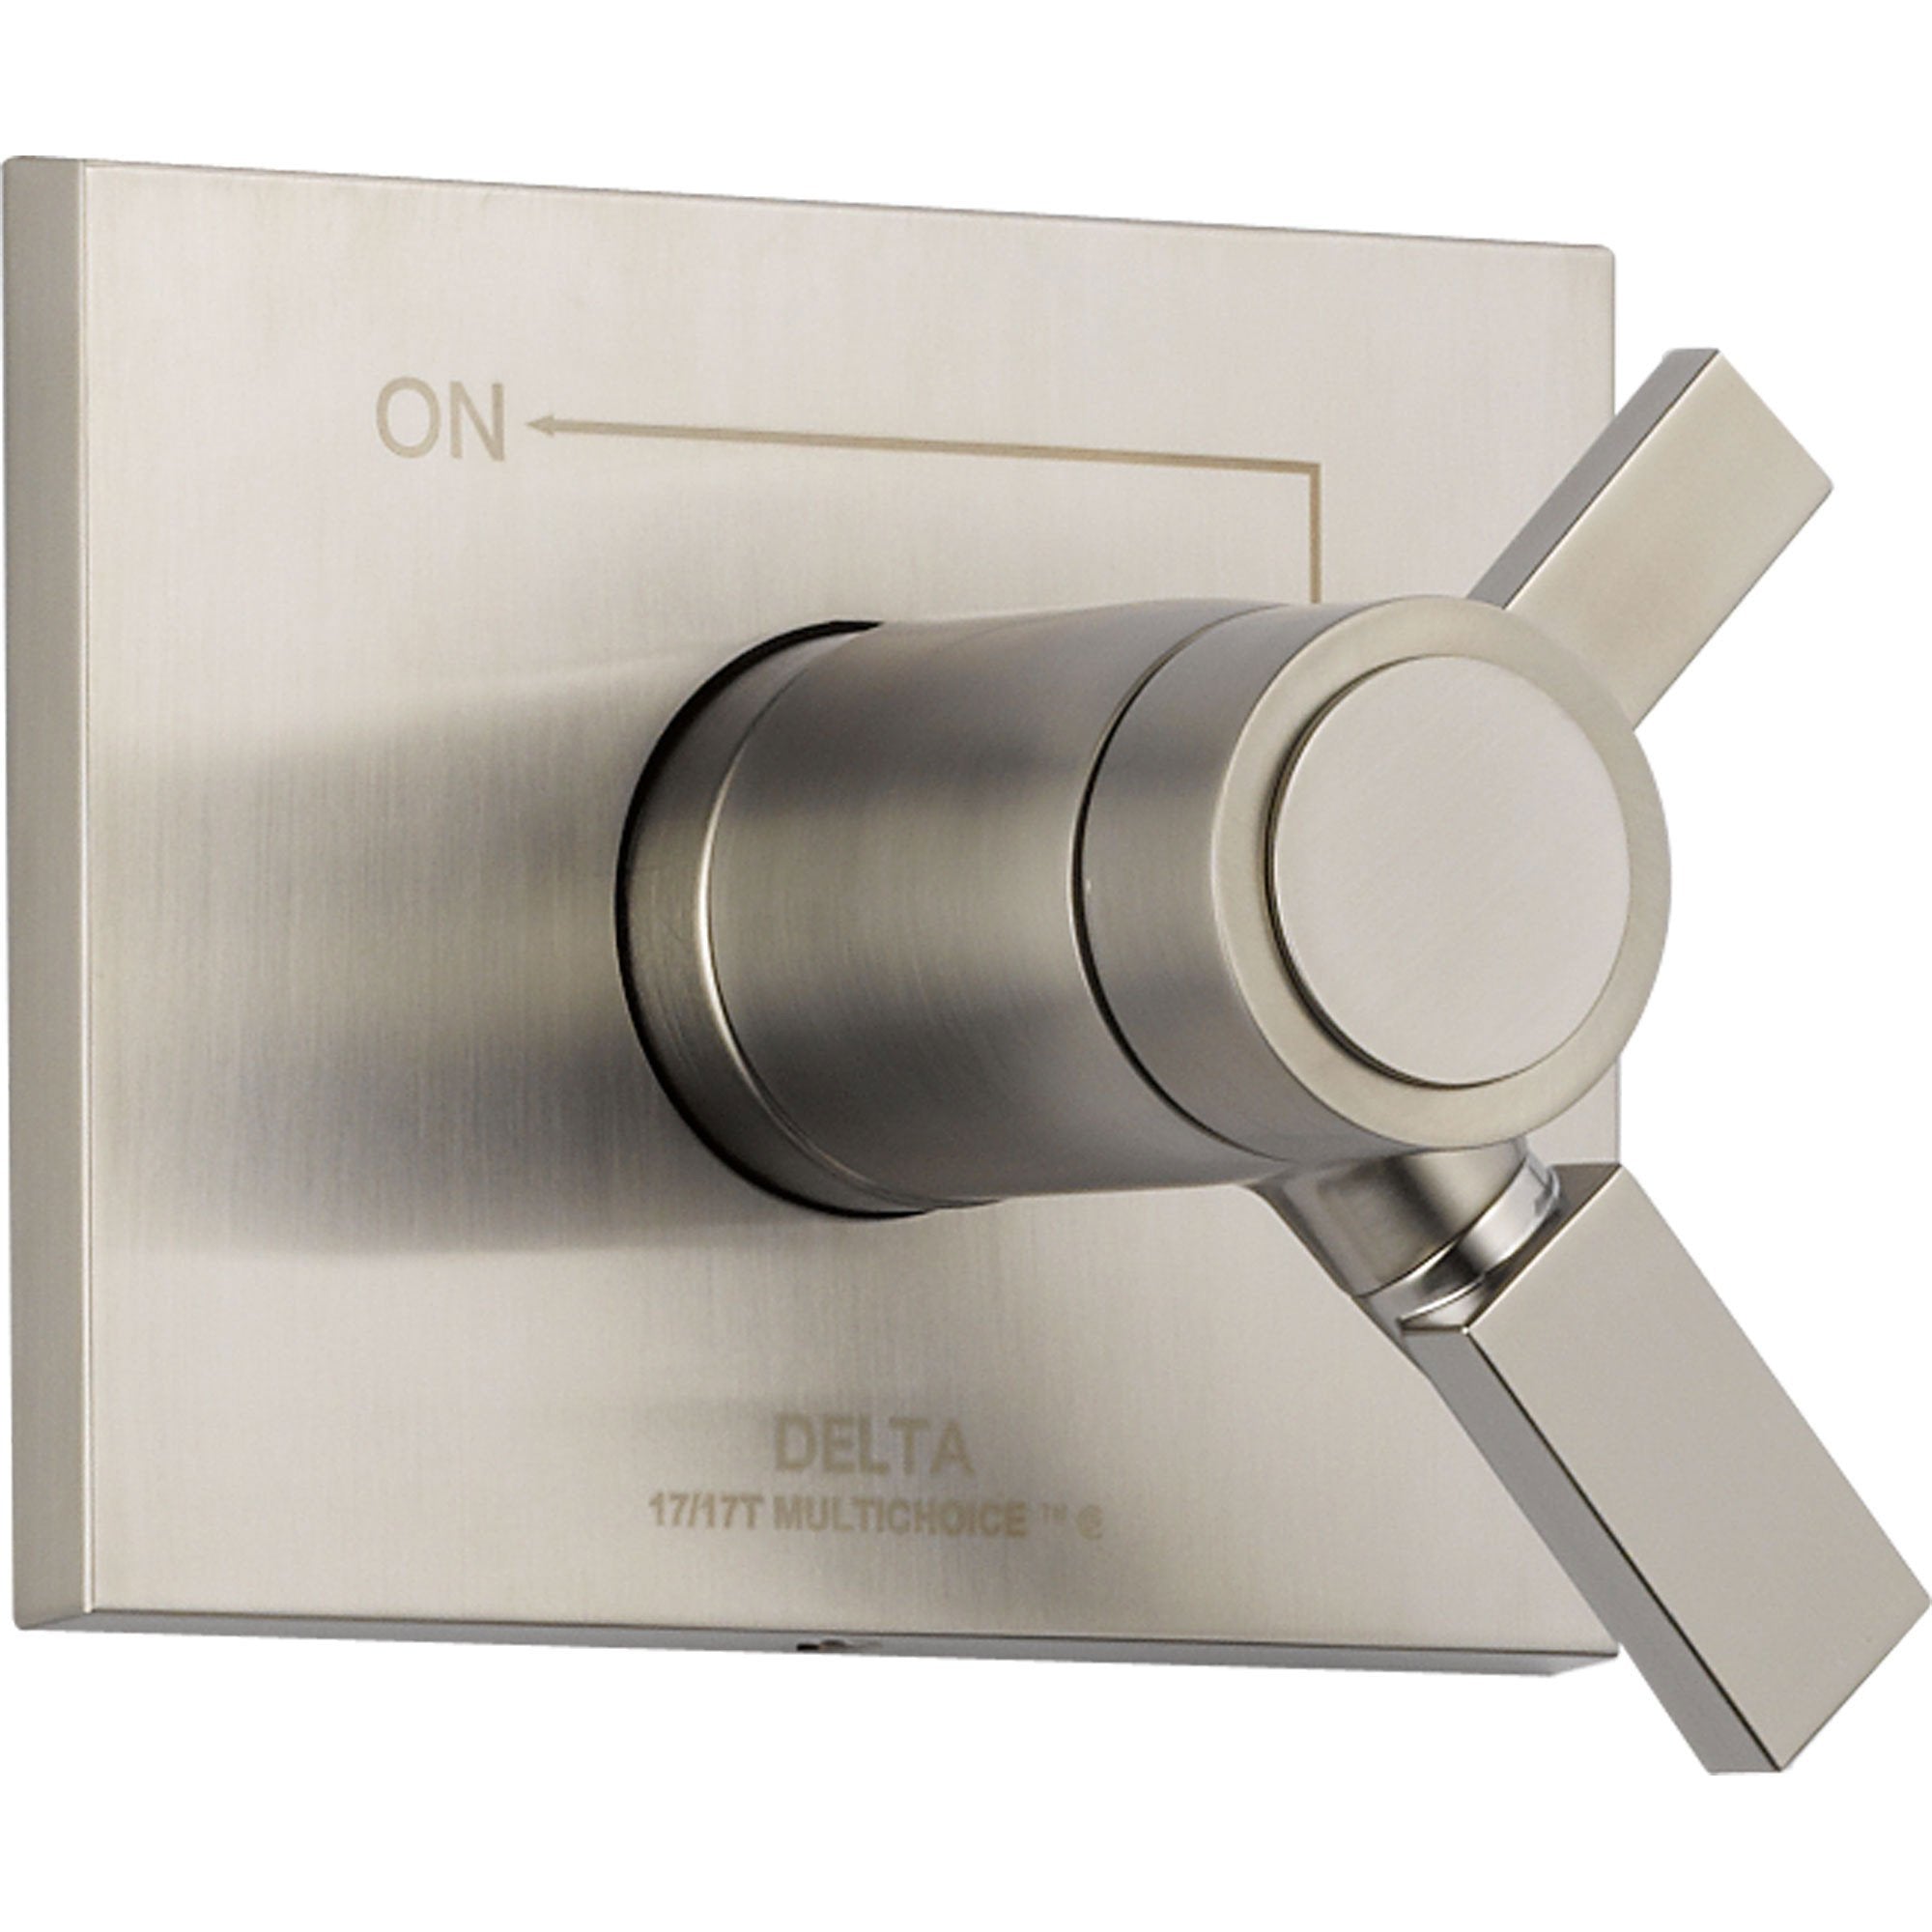 Delta Vero Stainless Steel Thermostatic Shower Dual Control with Valve D992V